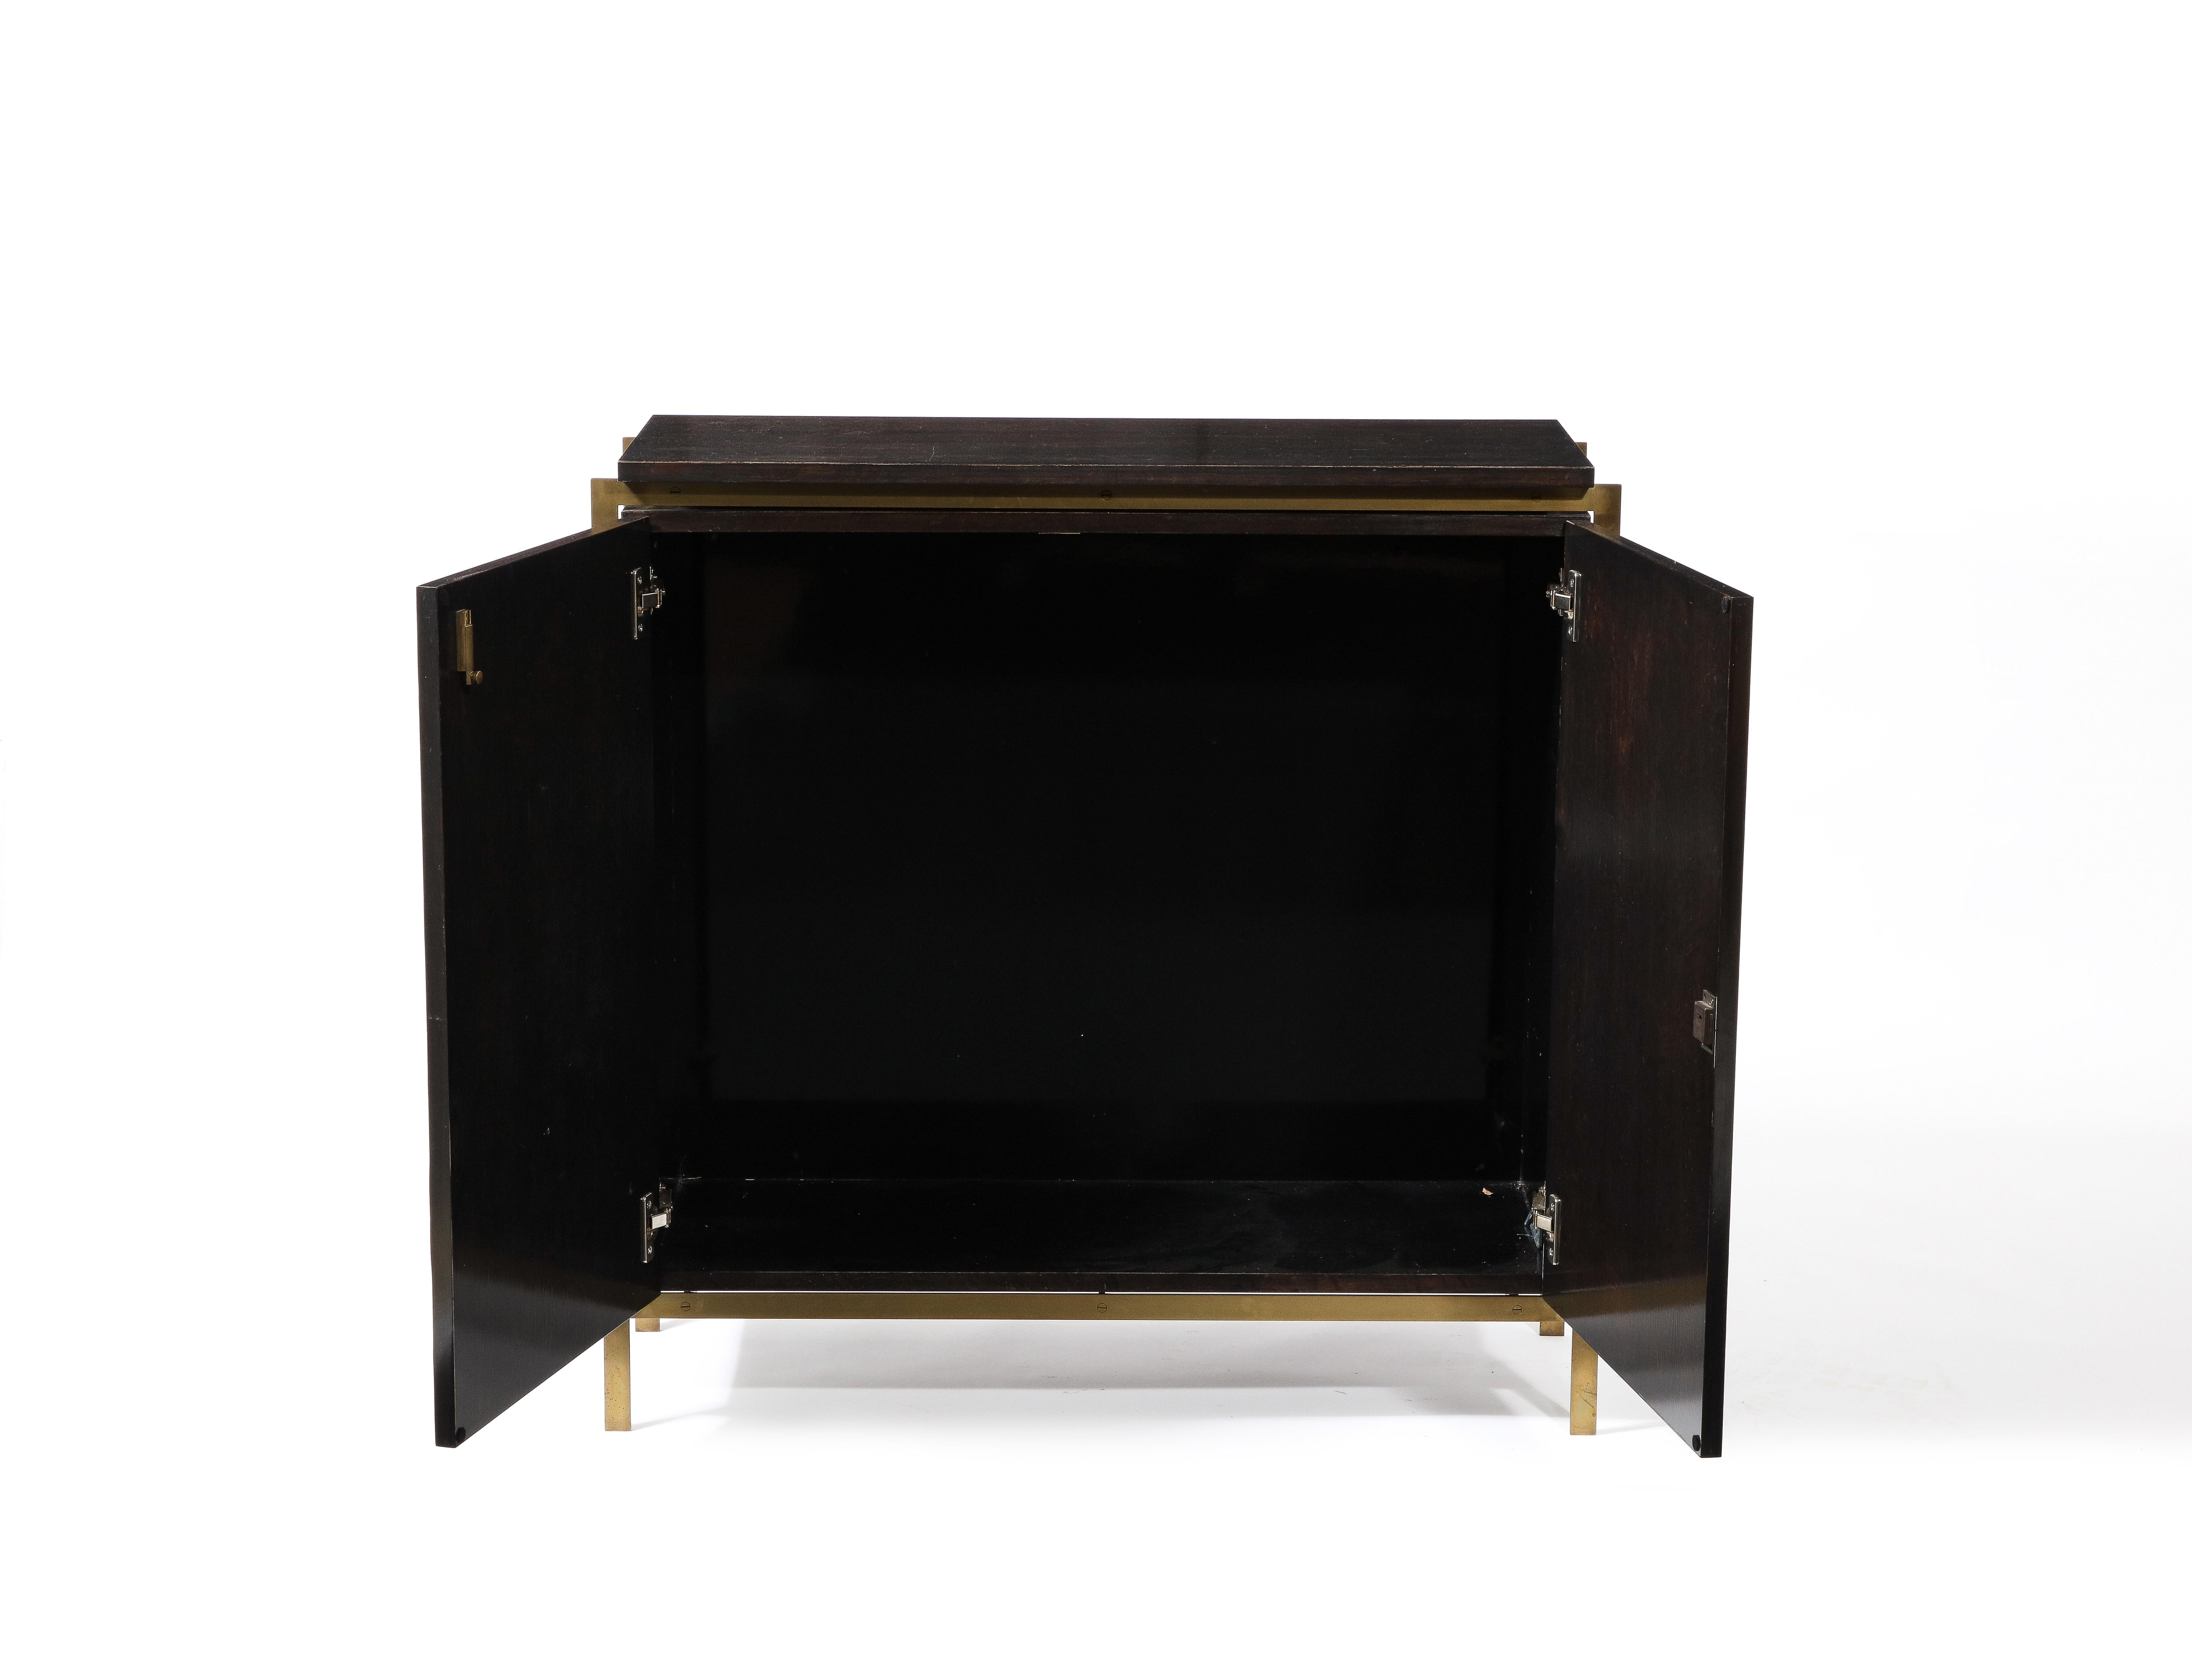 Patinated Billy Cotton Modernist Credenza in Brass, Dark Wood and Lacquer, USA 2014